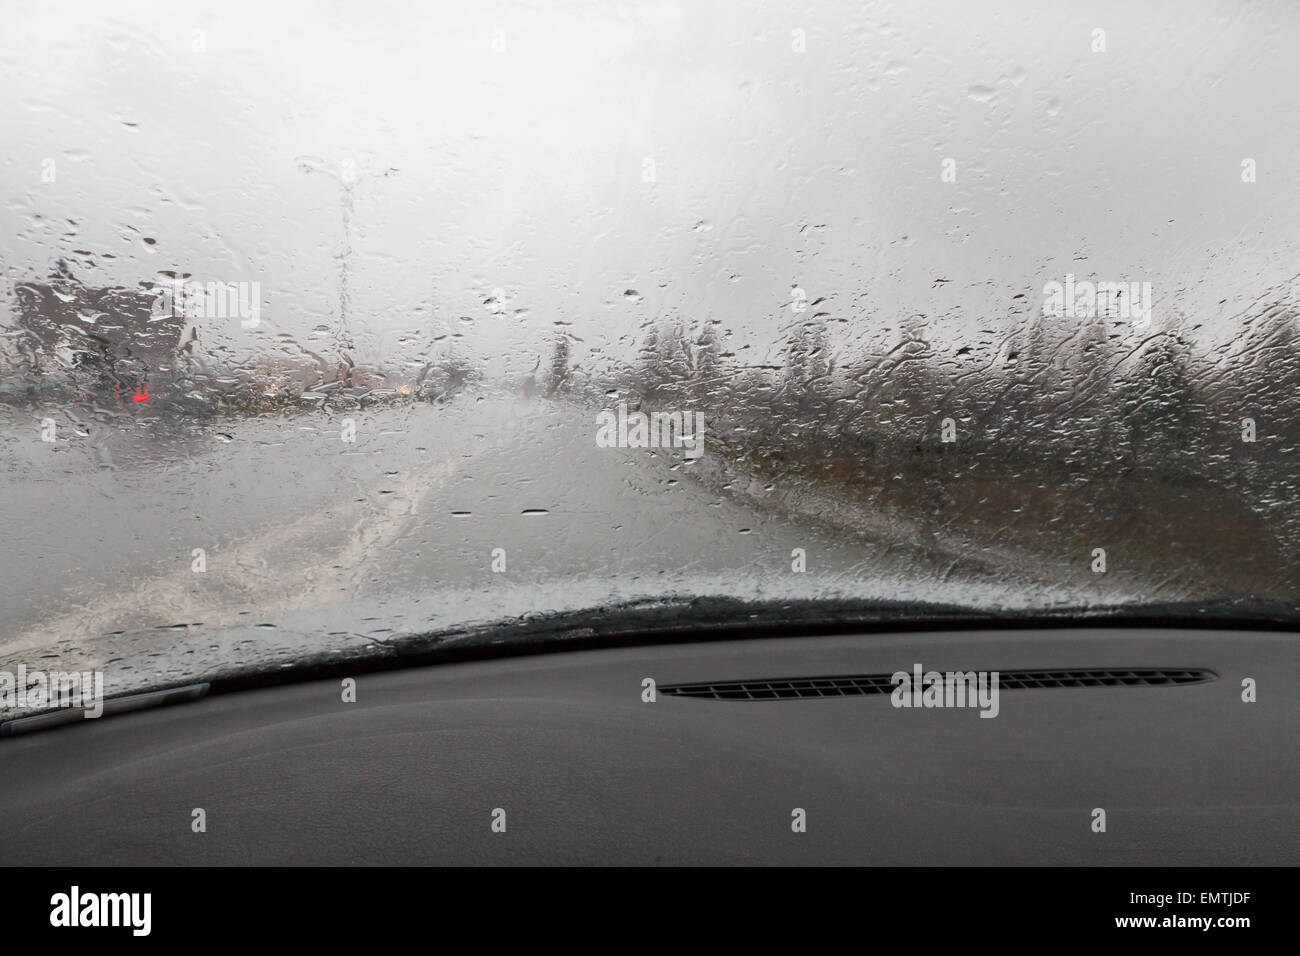 Driving in bad weather conditions Stock Photo